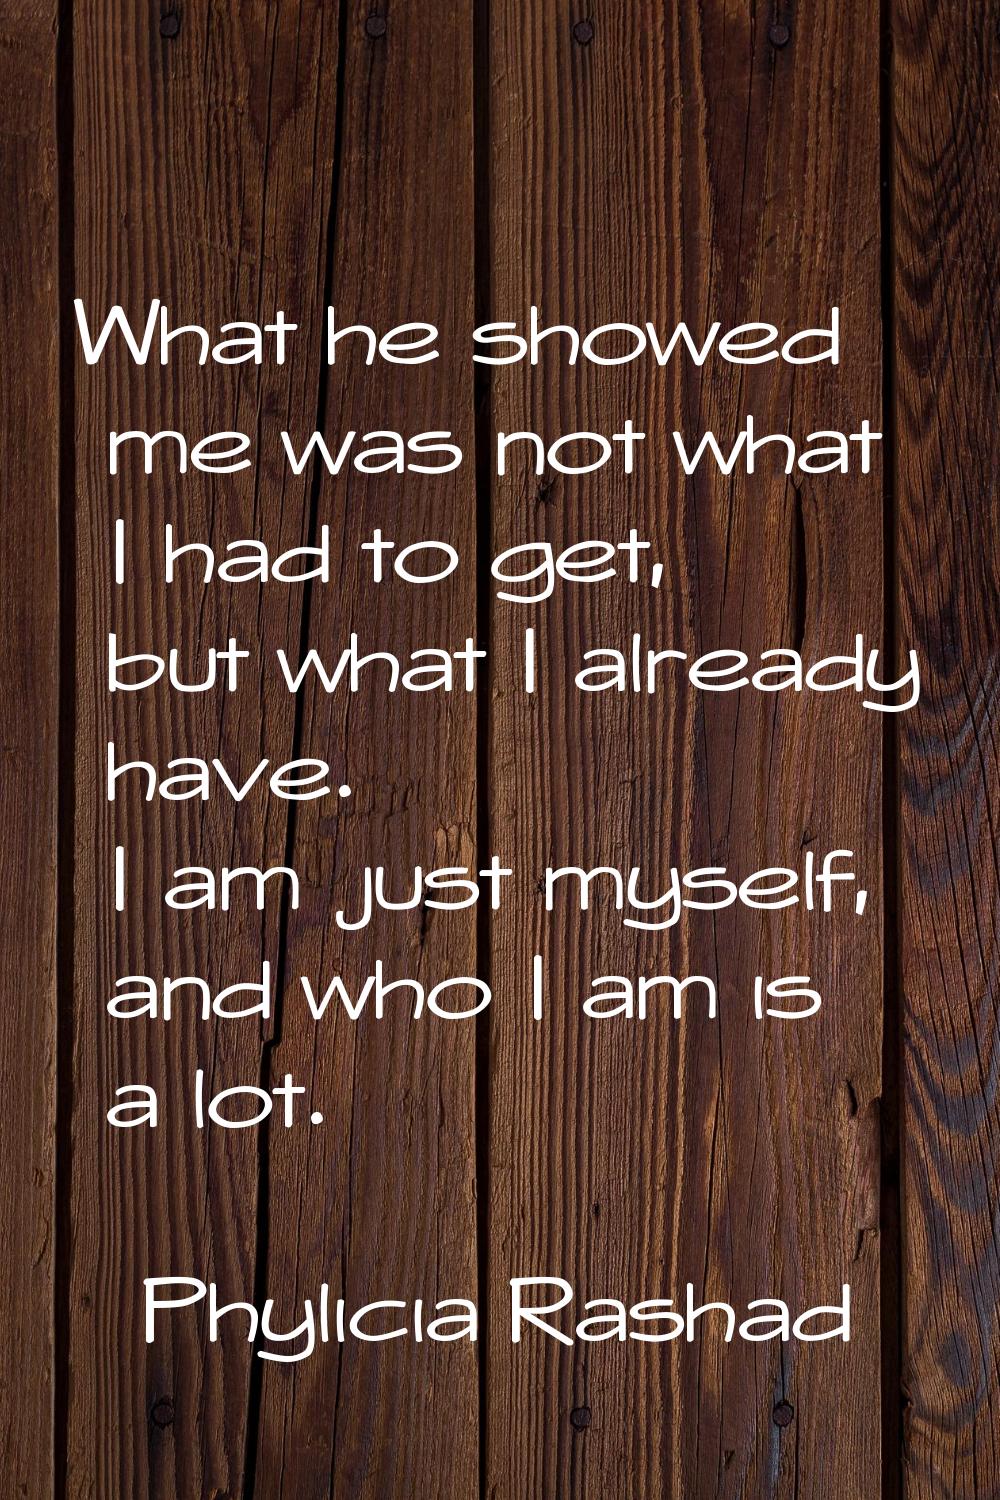 What he showed me was not what I had to get, but what I already have. I am just myself, and who I a